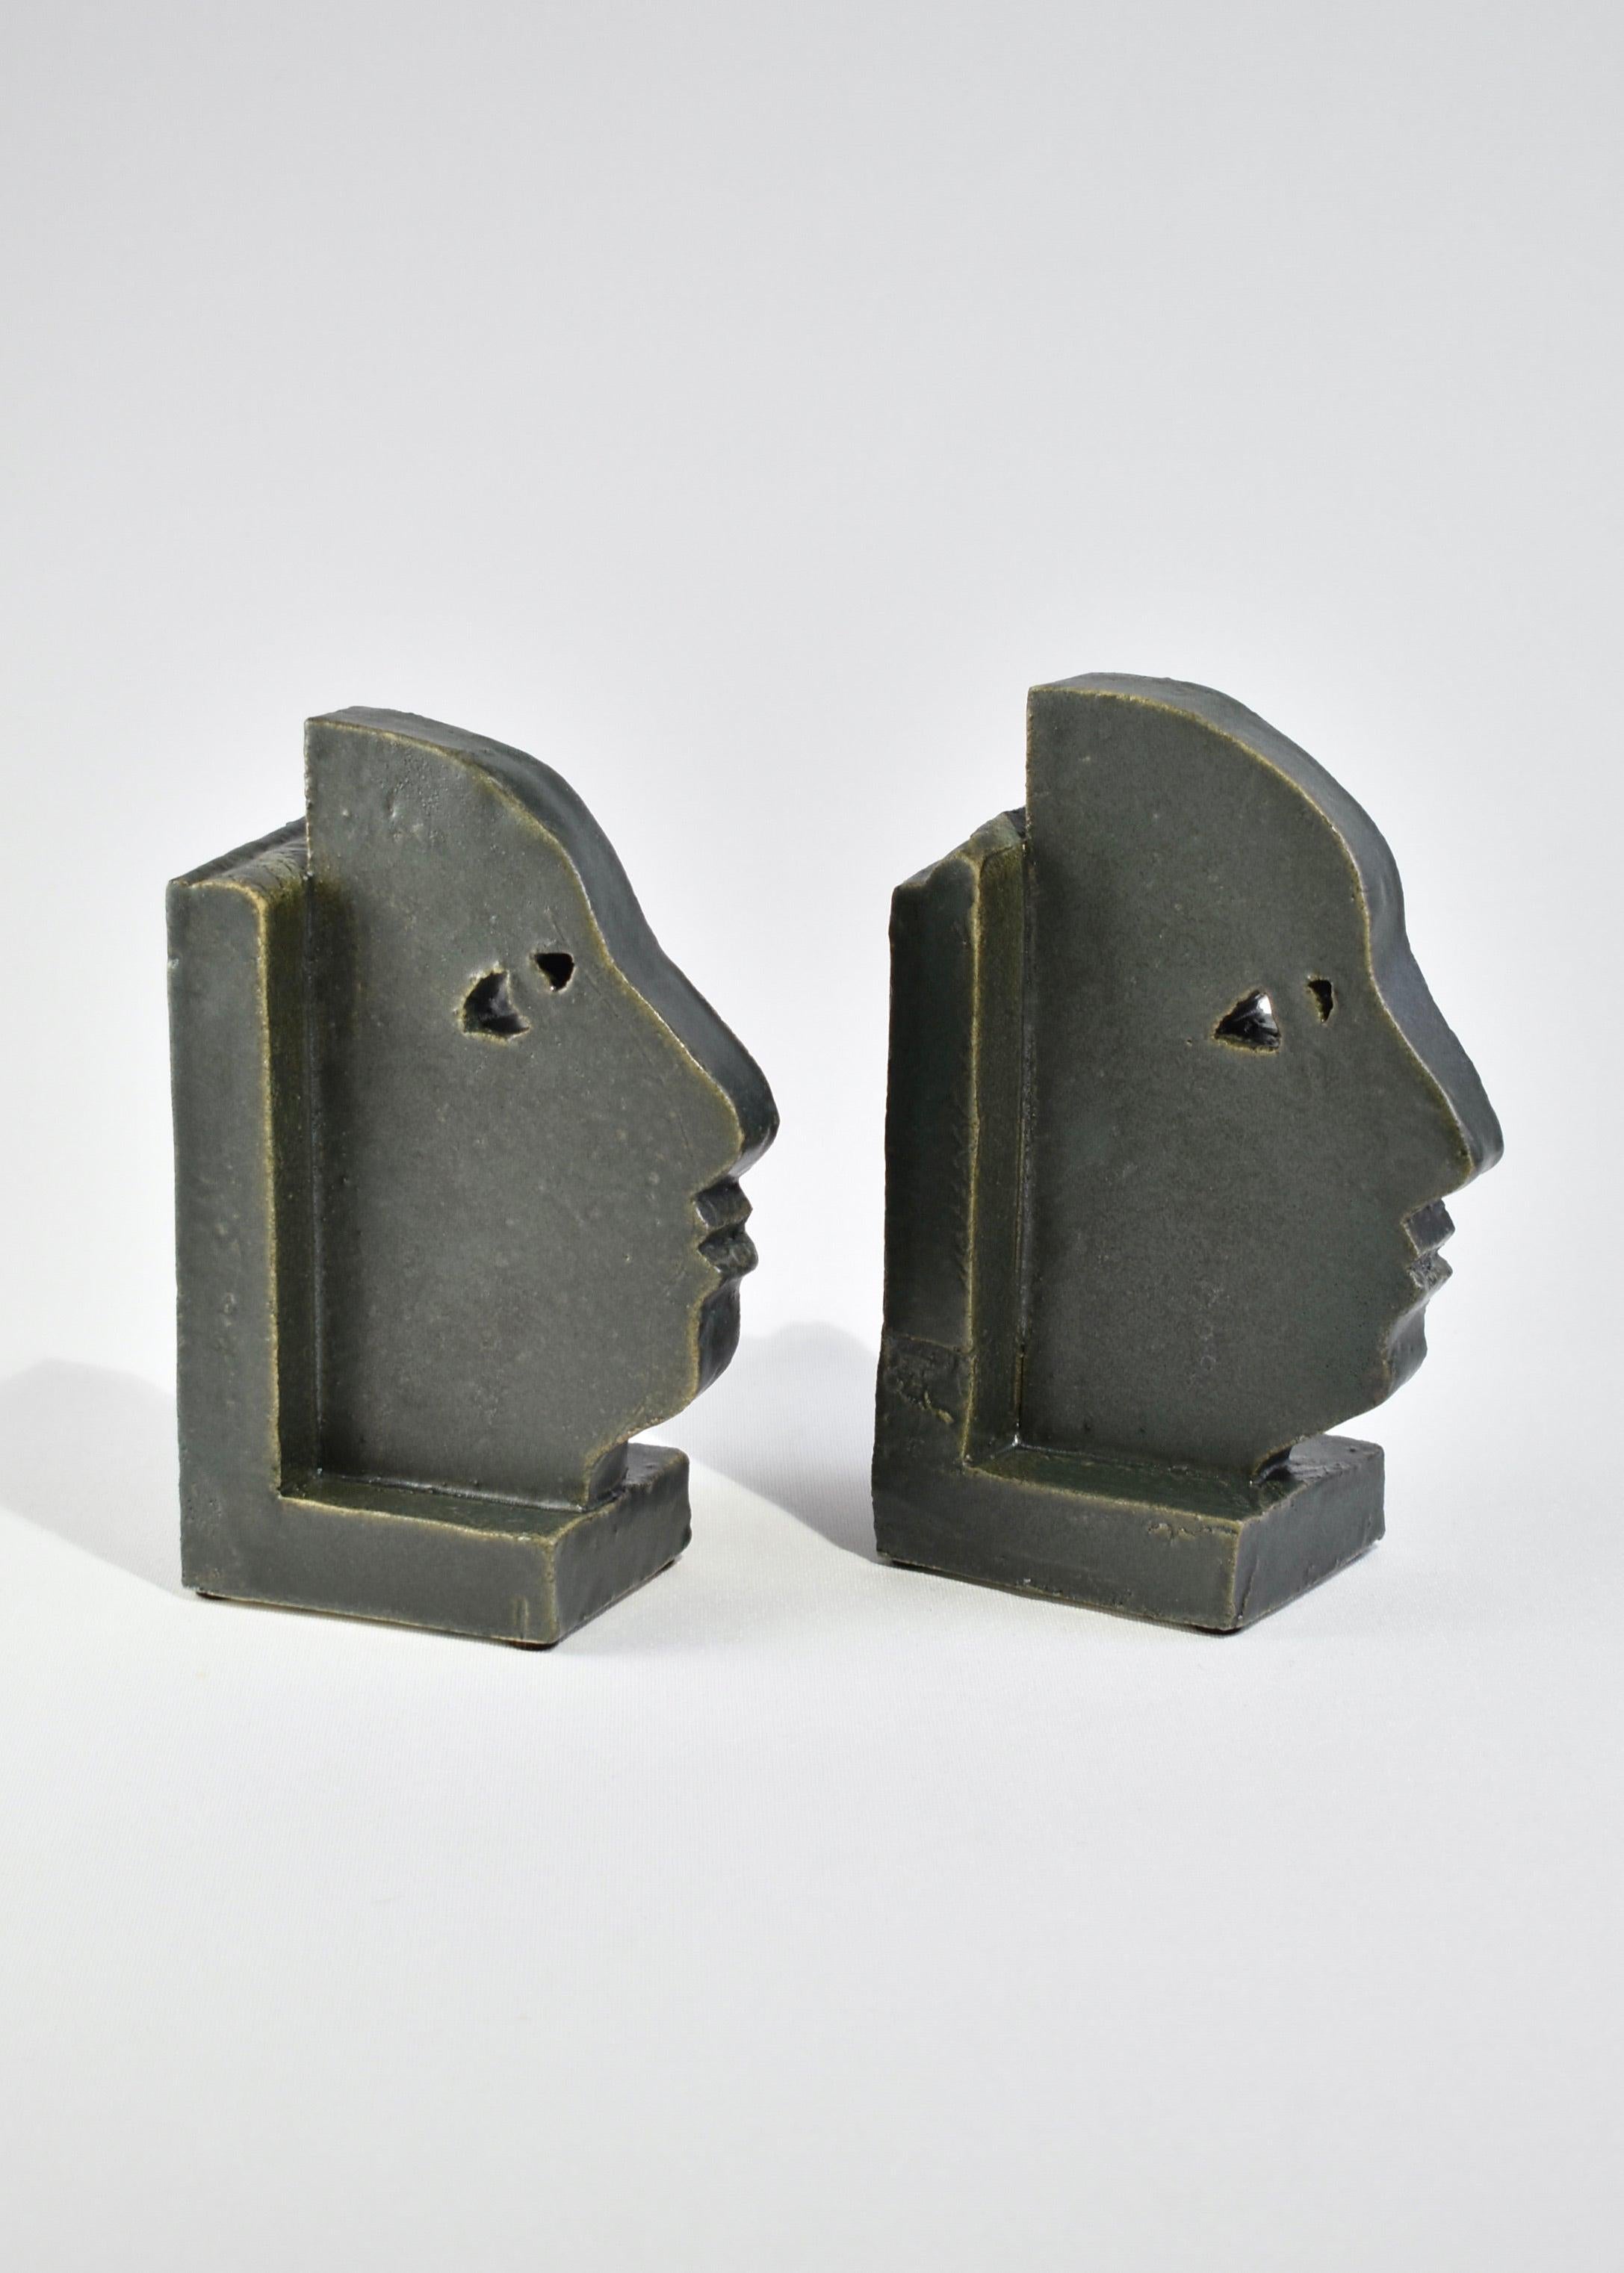 Handmade slab-built bookends with a face profile design in slate grey, set of two. By Shane Gabier, made in NYC.